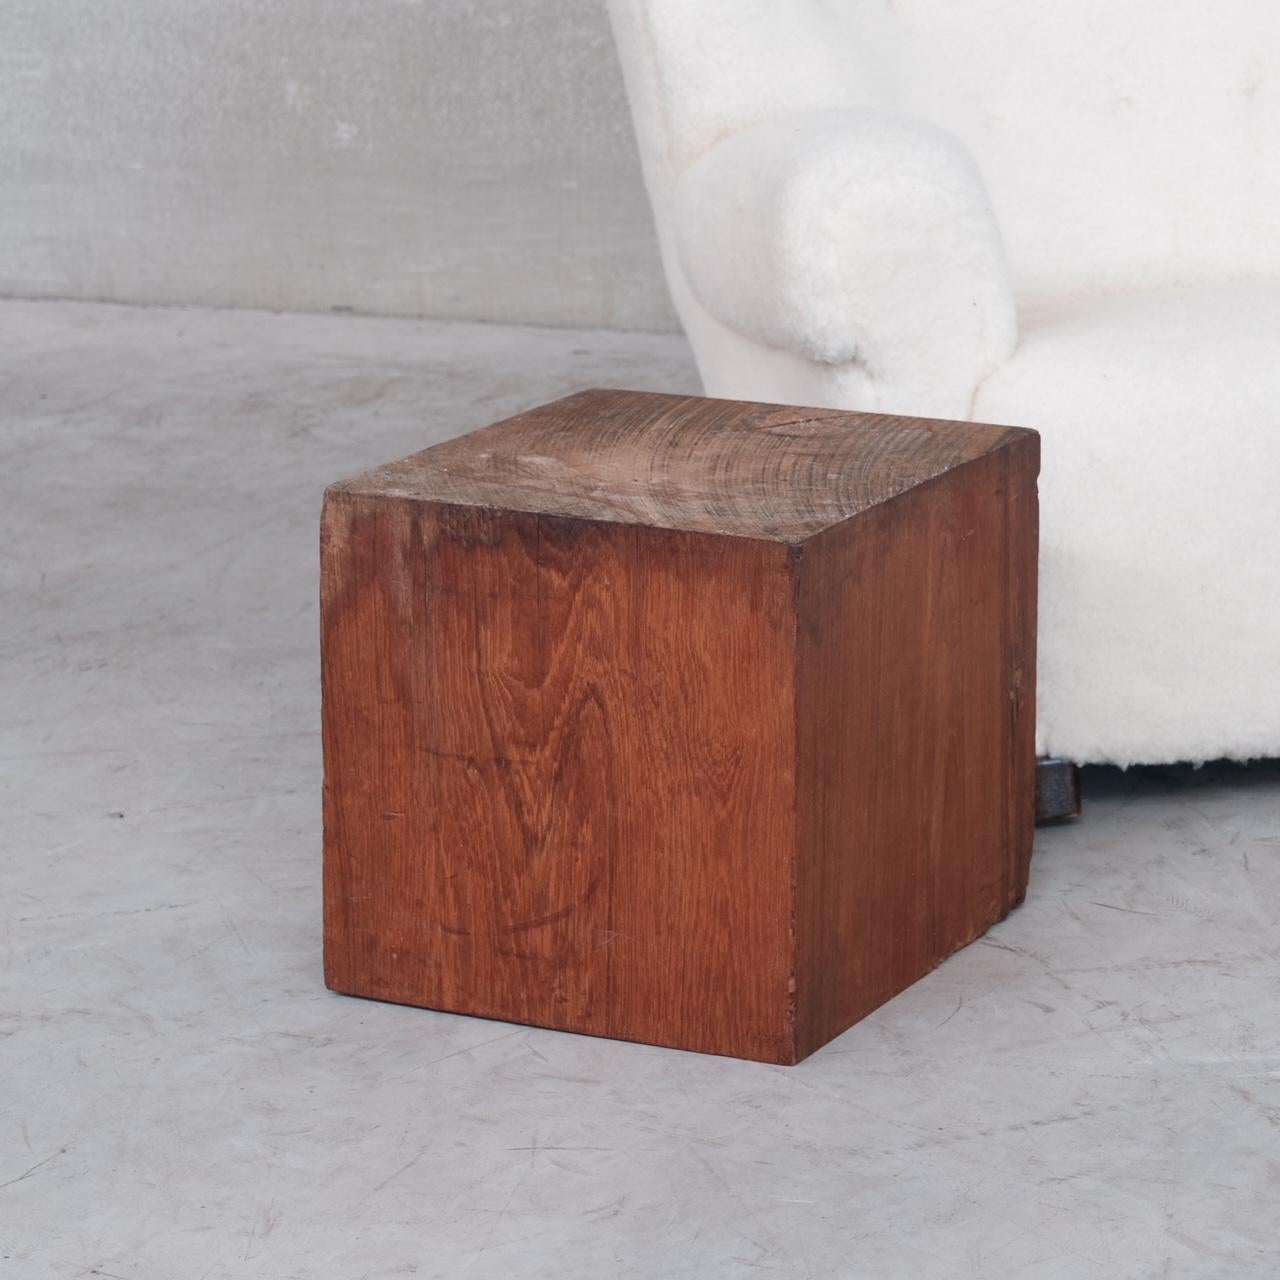 A heavy and distinctly solid wooden square block, ideal for art display or as a side table. 

Belgium, c1960s. 

The wood is perhaps exotic. 

Some scuffs and wear commensurate with age. 

Location: Belgium Gallery. 

Dimensions: 41 W x 41